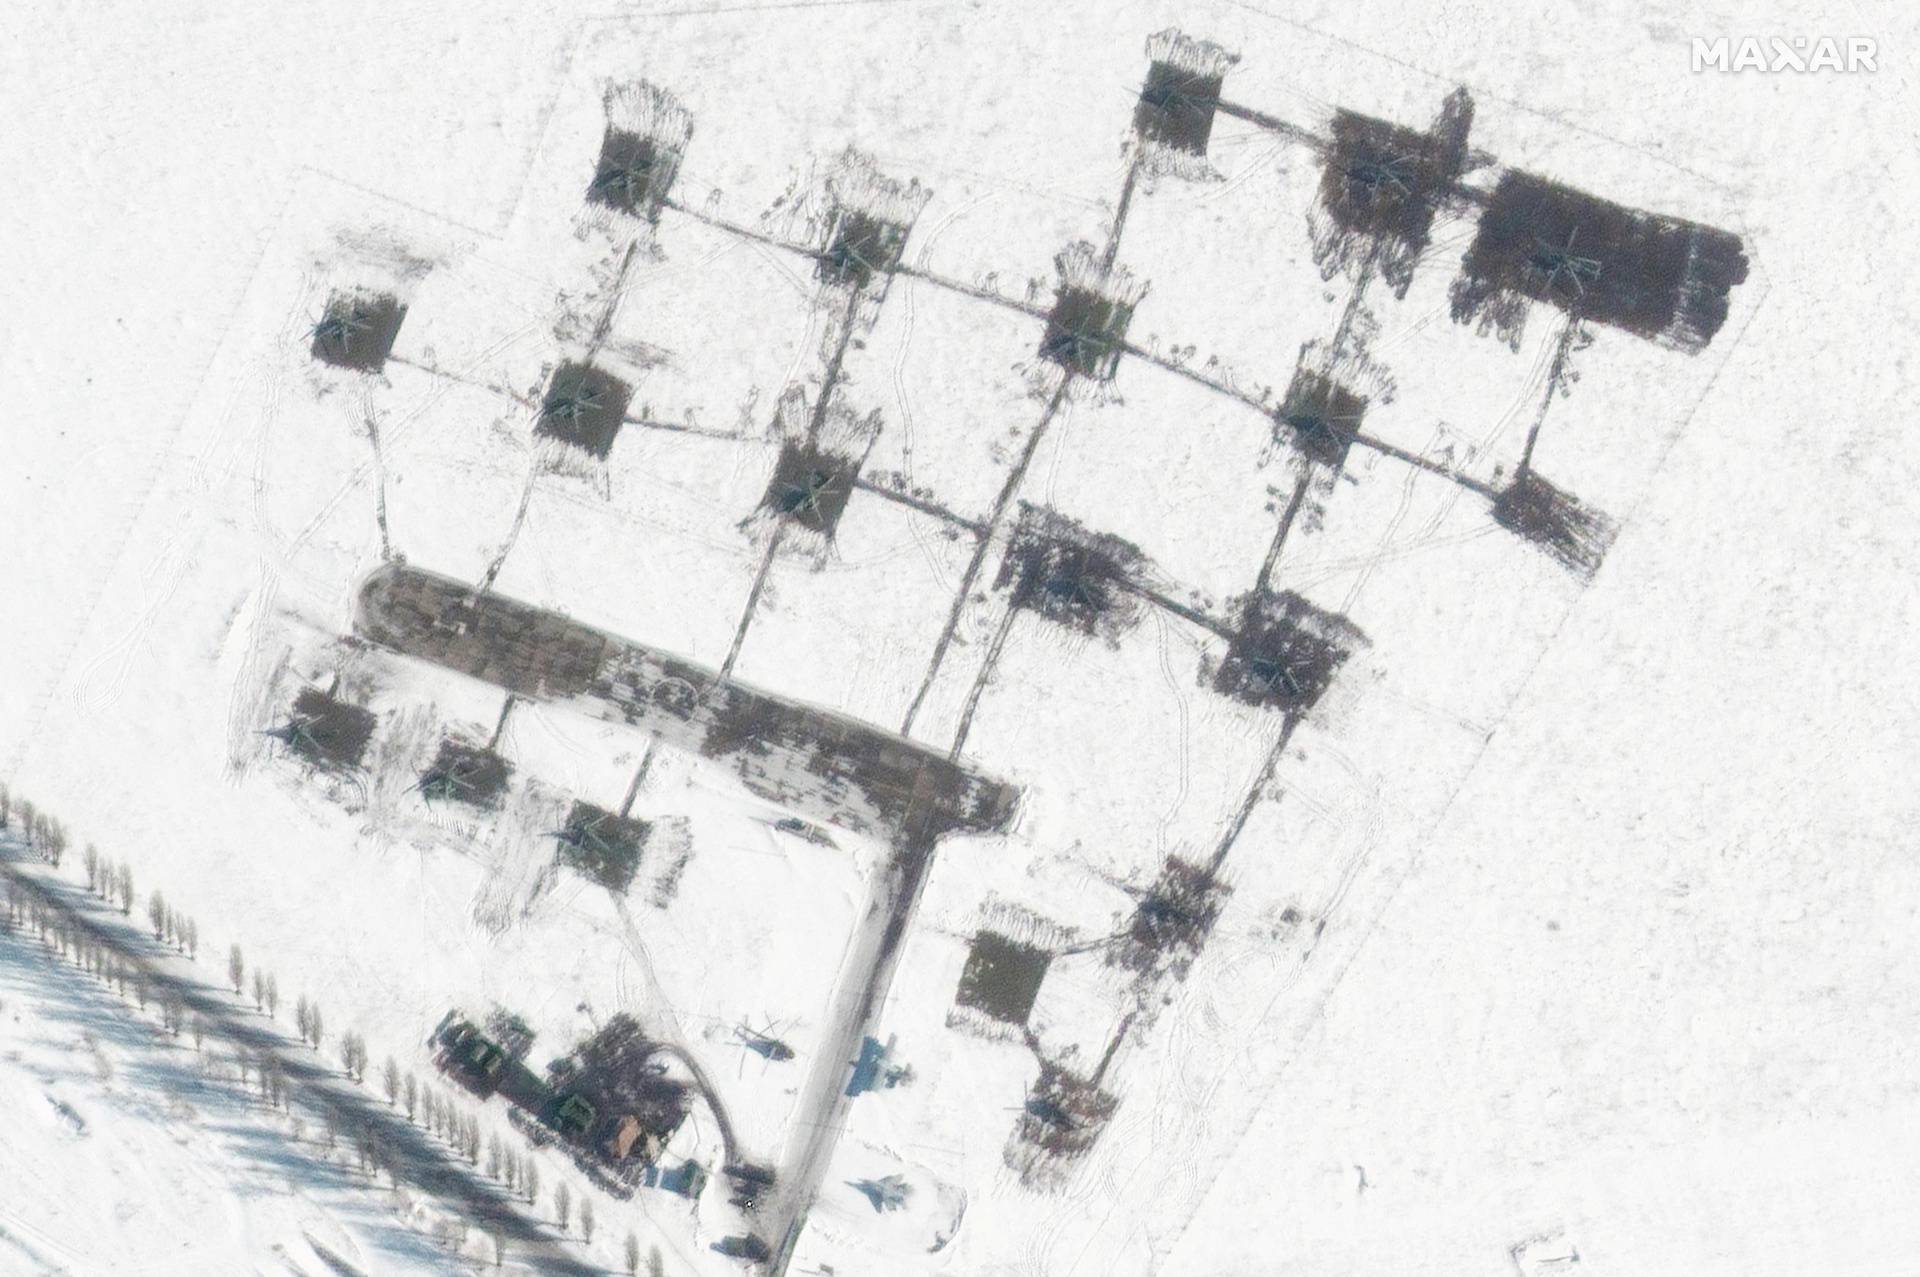 A satellite image shows a closer view of a helicopter unit in Belgorod